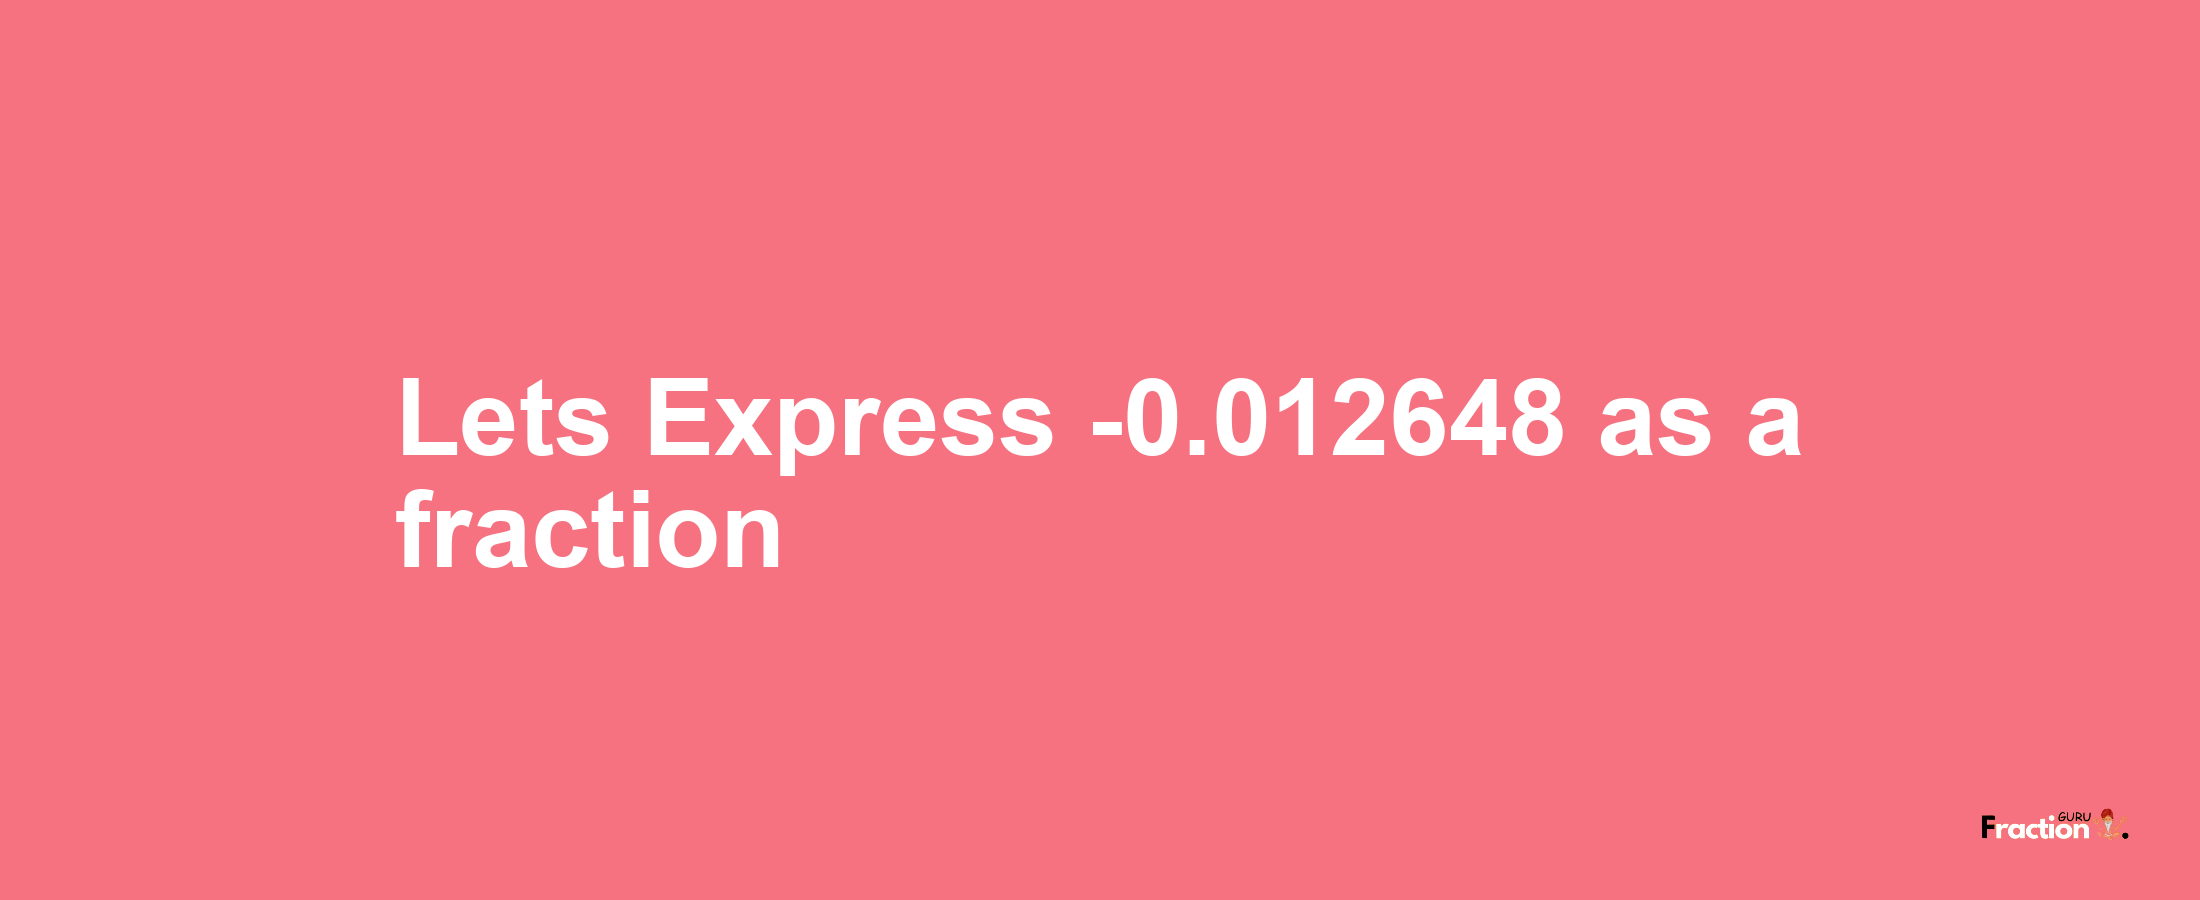 Lets Express -0.012648 as afraction